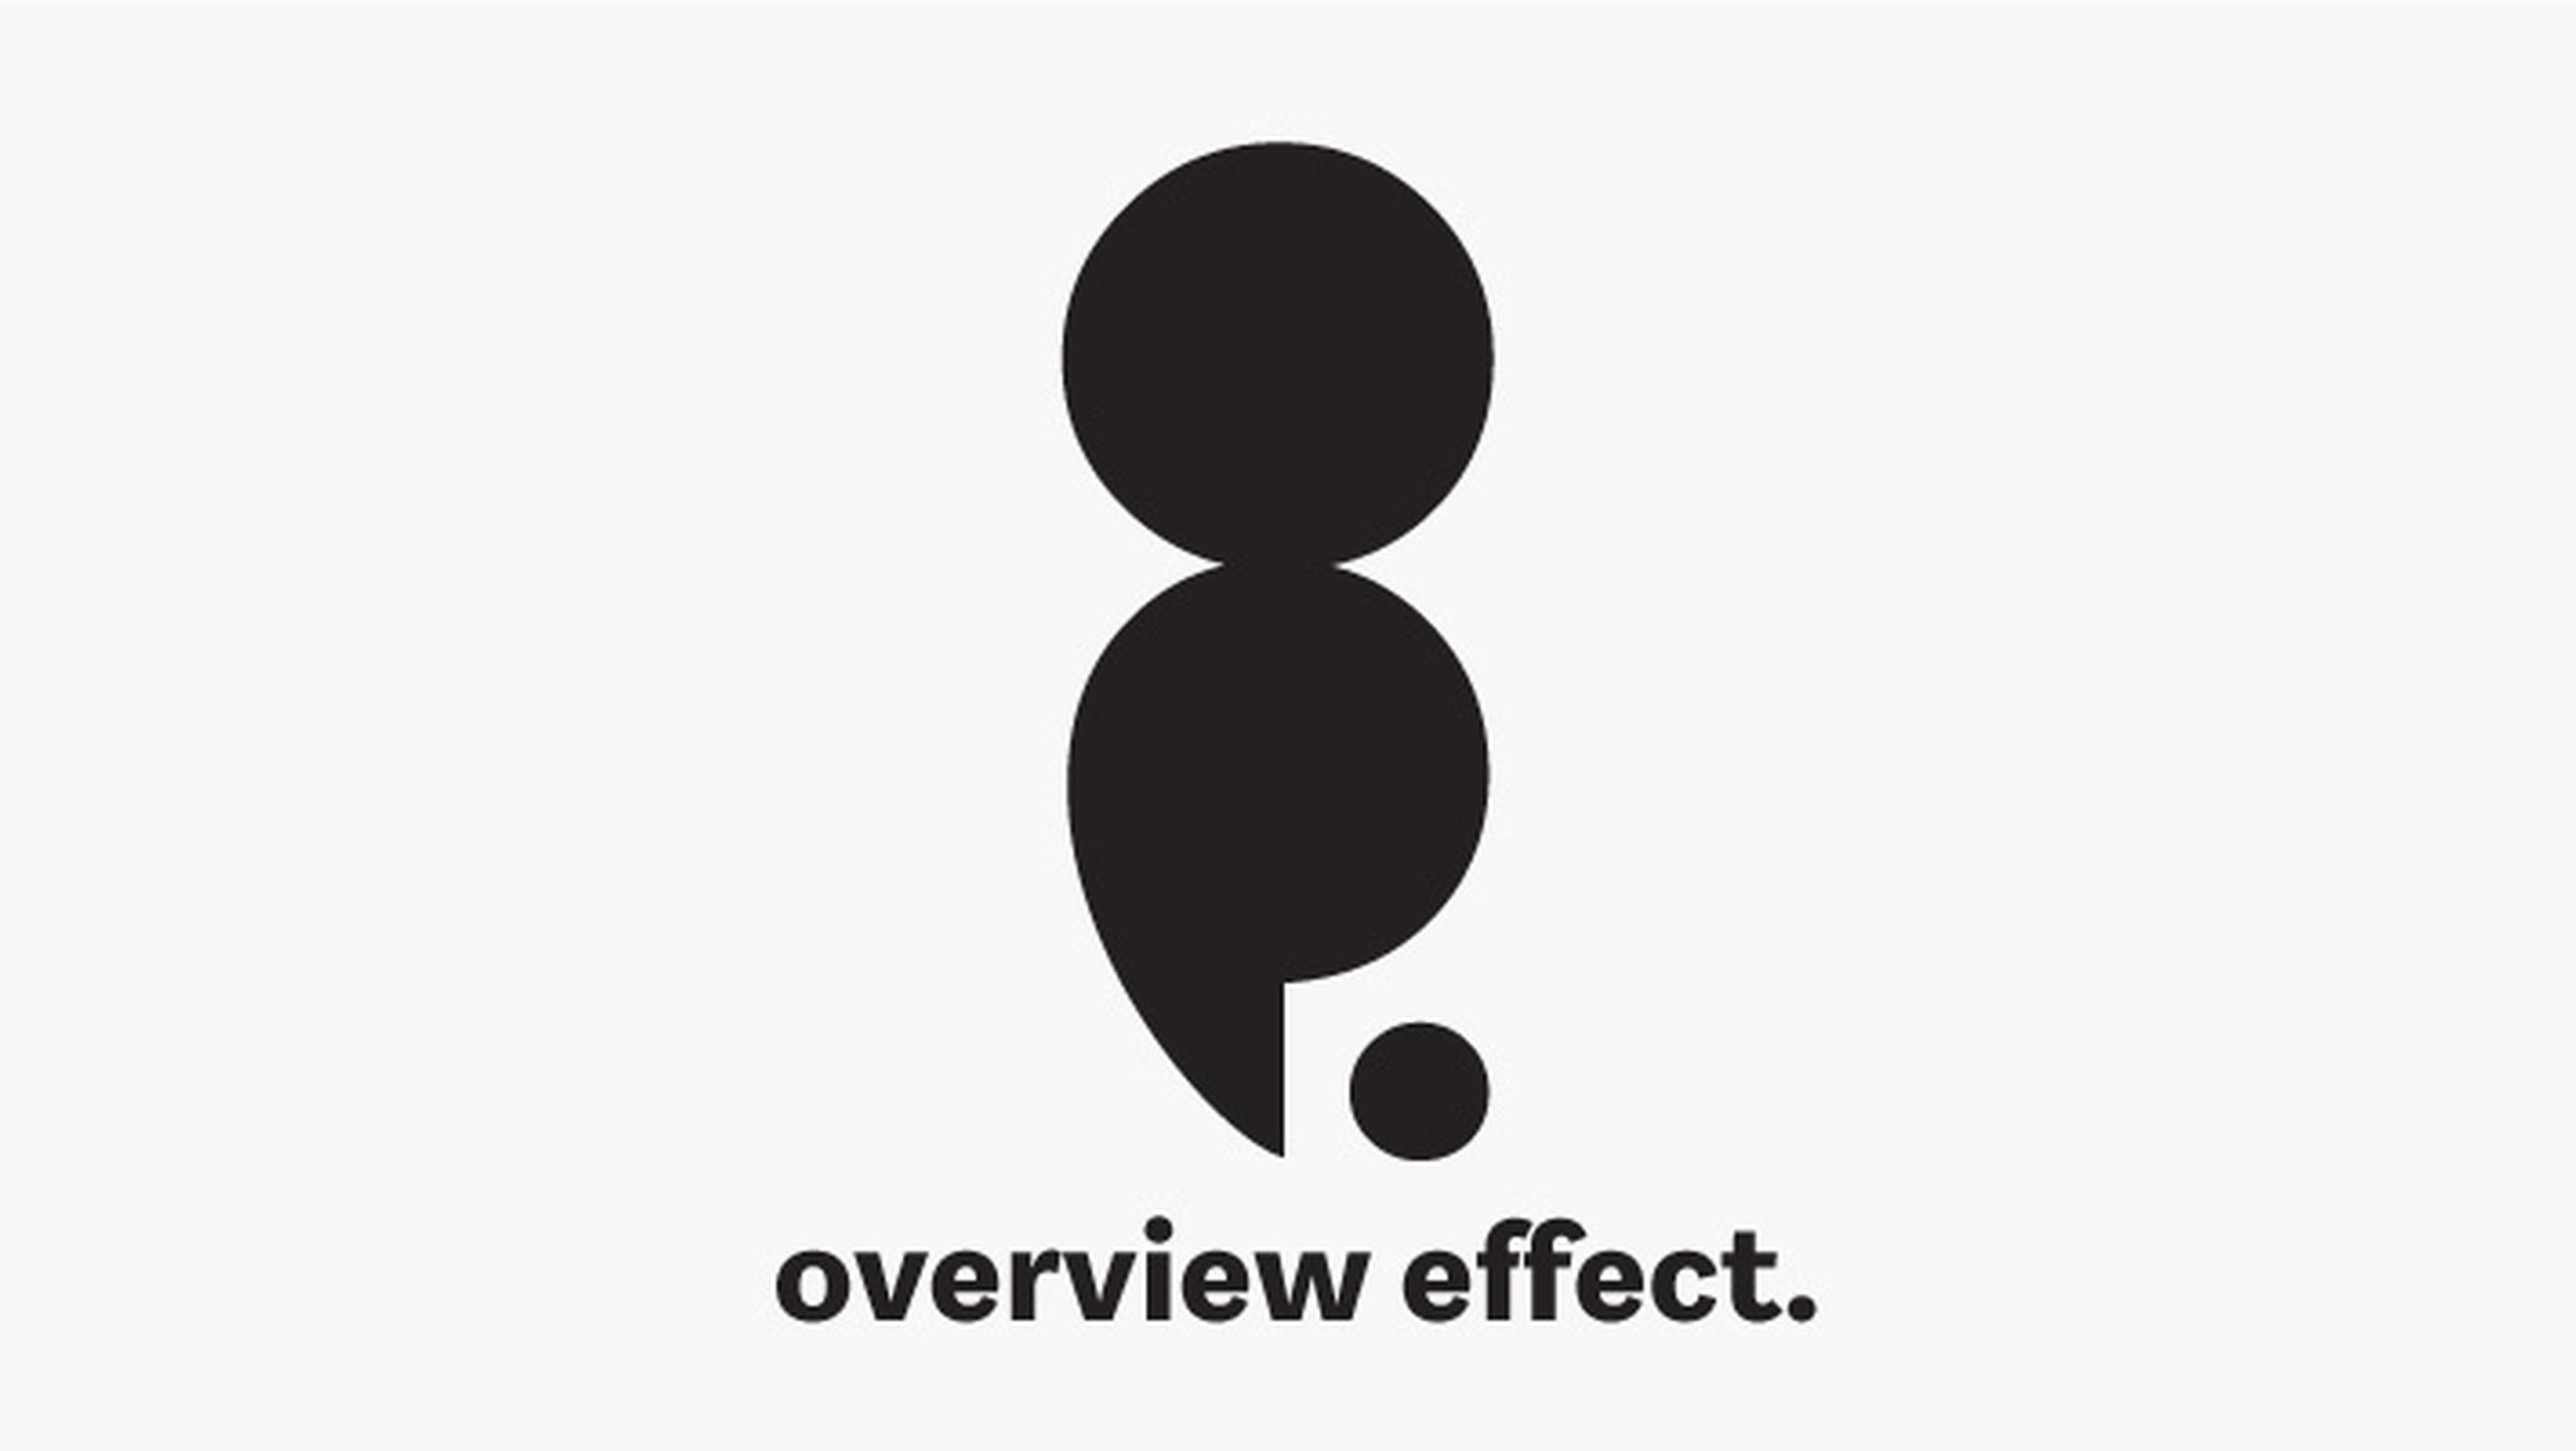 Overview effect,